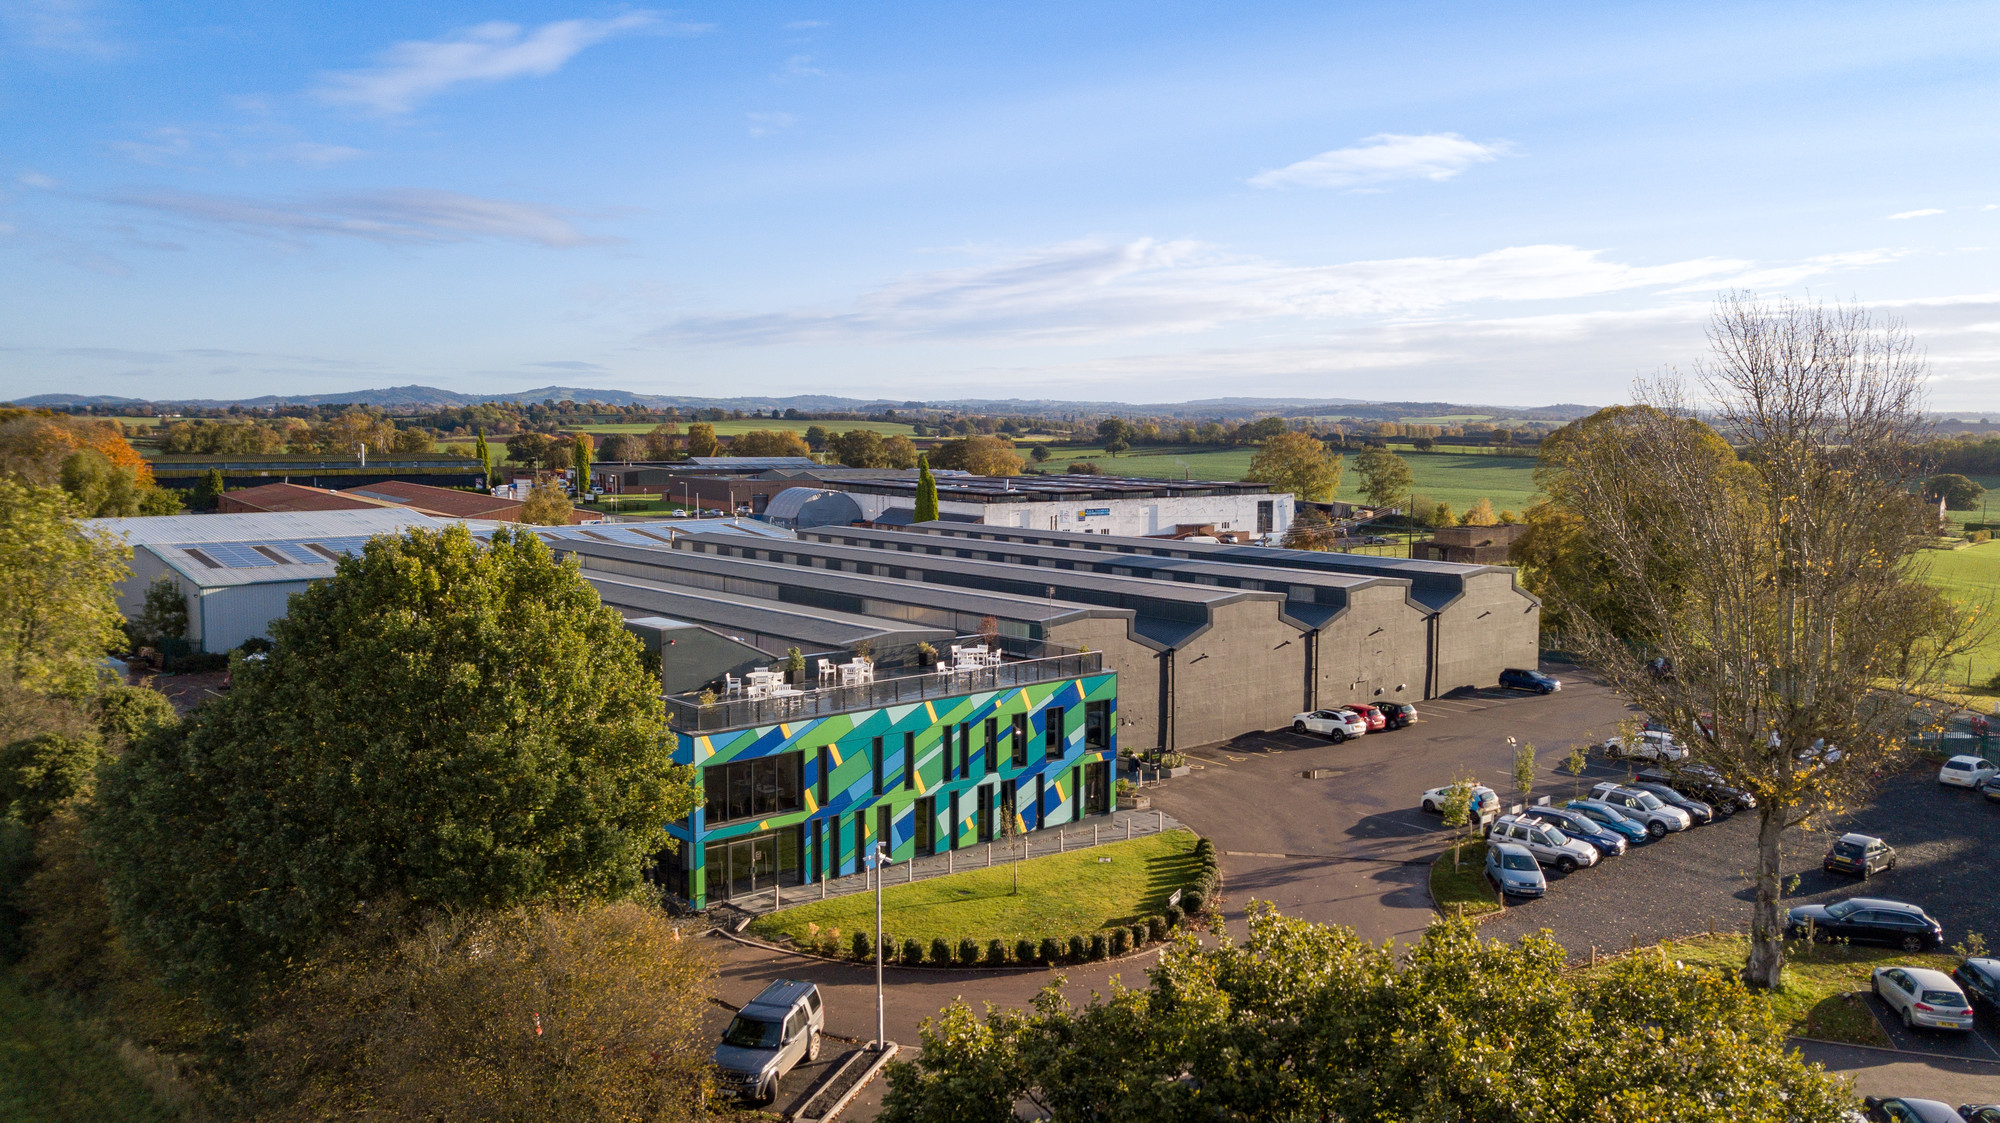 An aerial picture of DRPG HQ in the Midlands, UK